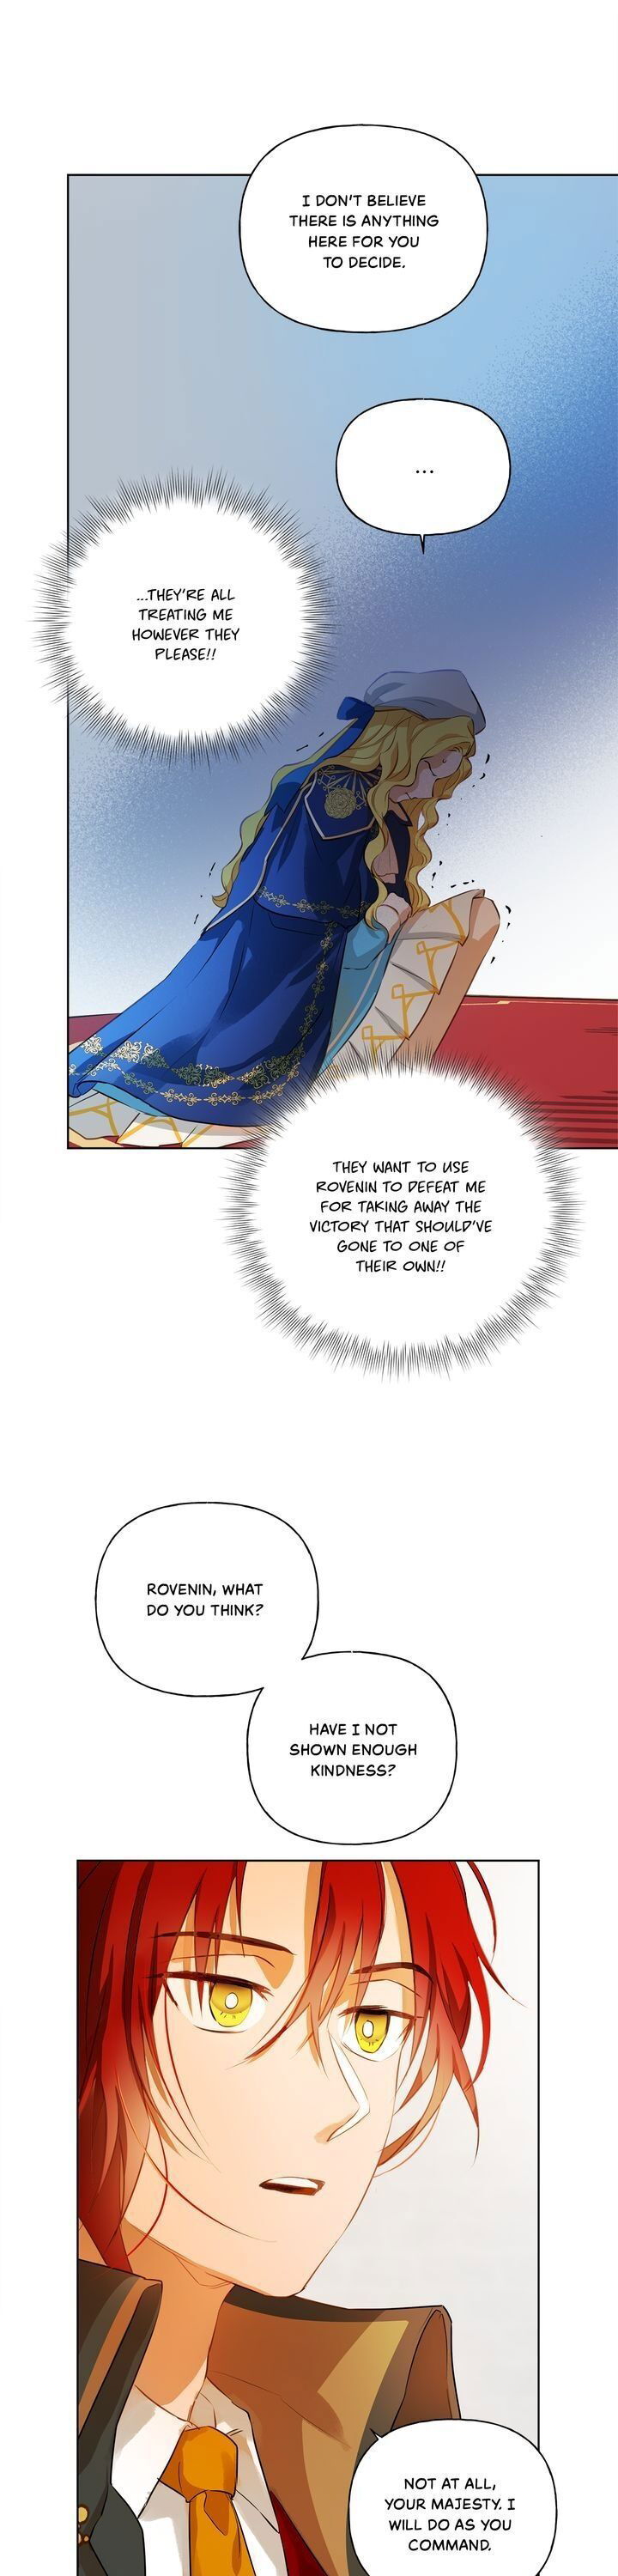 the-golden-haired-elementalist-chap-38-48